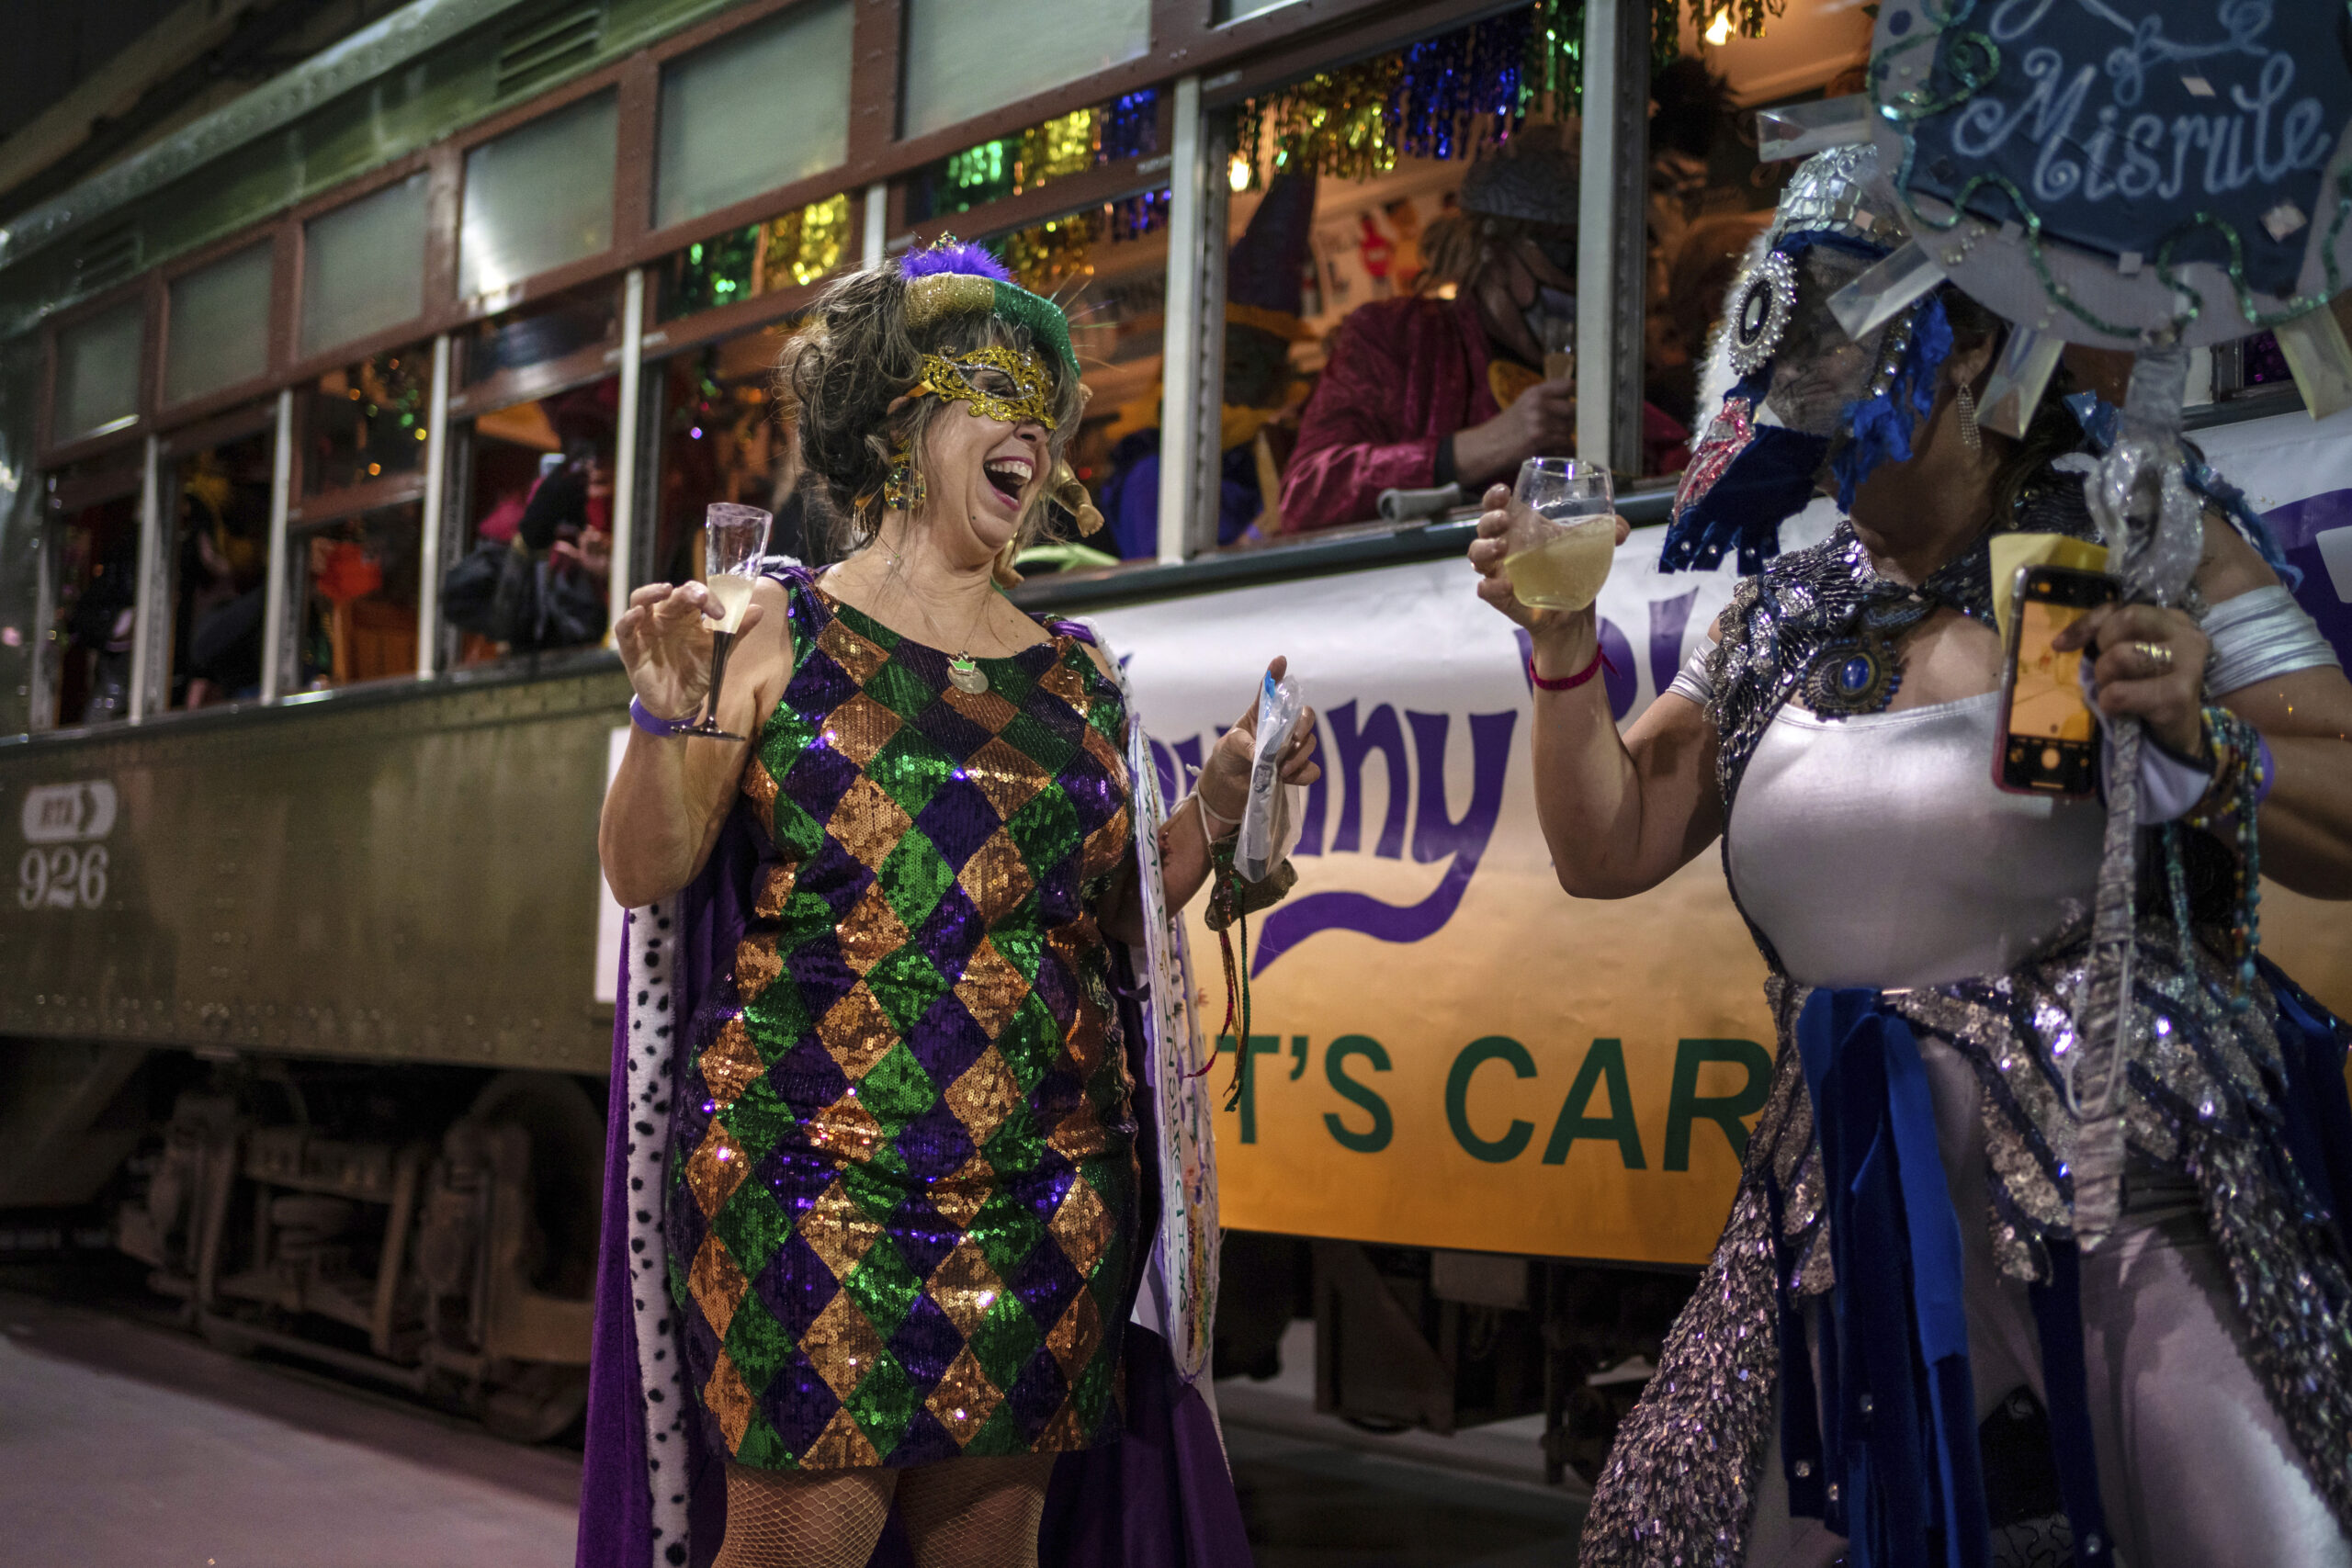 The Phunny Phorty Phellows (PPP) Queen Julie Holman, left, dances before hopping onto the street car to take their historic Twelfth Night ride to announce that Carnival has begun in New Orleans, Thursday, Jan. 6, 2022. The Phellows are a Mardi Gras organization that first took to the streets in 1878 and ceased parading in 1898. The group was revived in 1981. They were known for their satirical parades and today's krewe members' costumes often reflect current events. (AP Photo/Kathleen Flynn)